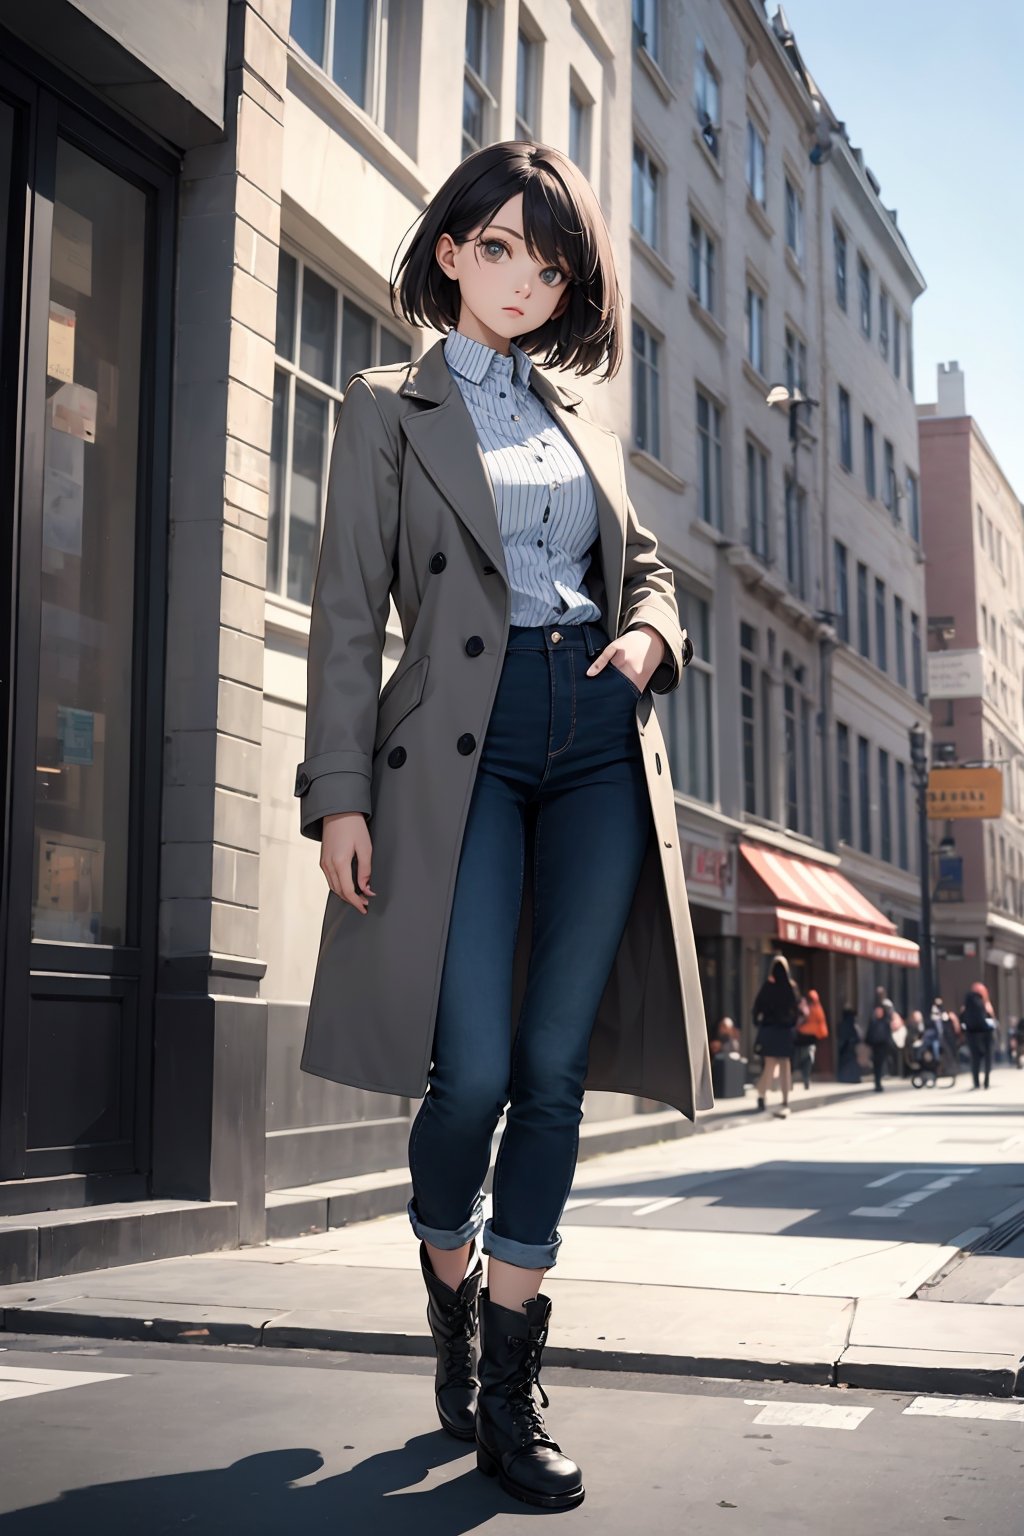 masterpiece, ultra high res, absurdres, (photo realistic),
A young female fashion model, armond eyes, BREAK,
gradient hair, Loose Topsy-Tail,BREAK,
(early spring fashion:1.2),
She looks cool and urban in her grey coat, striped shirt, black jeans, and lug sole boots. Her coat has some distressed details and an oversized fit that give it an edgy vibe. Her shirt is blue and white striped, adding some freshness to her look. Her boots are combat-style and add some contrast to her outfit. She is ready to hit the streets with confidence.
(dynamic pose:0.7),
simple background,dutch angle,